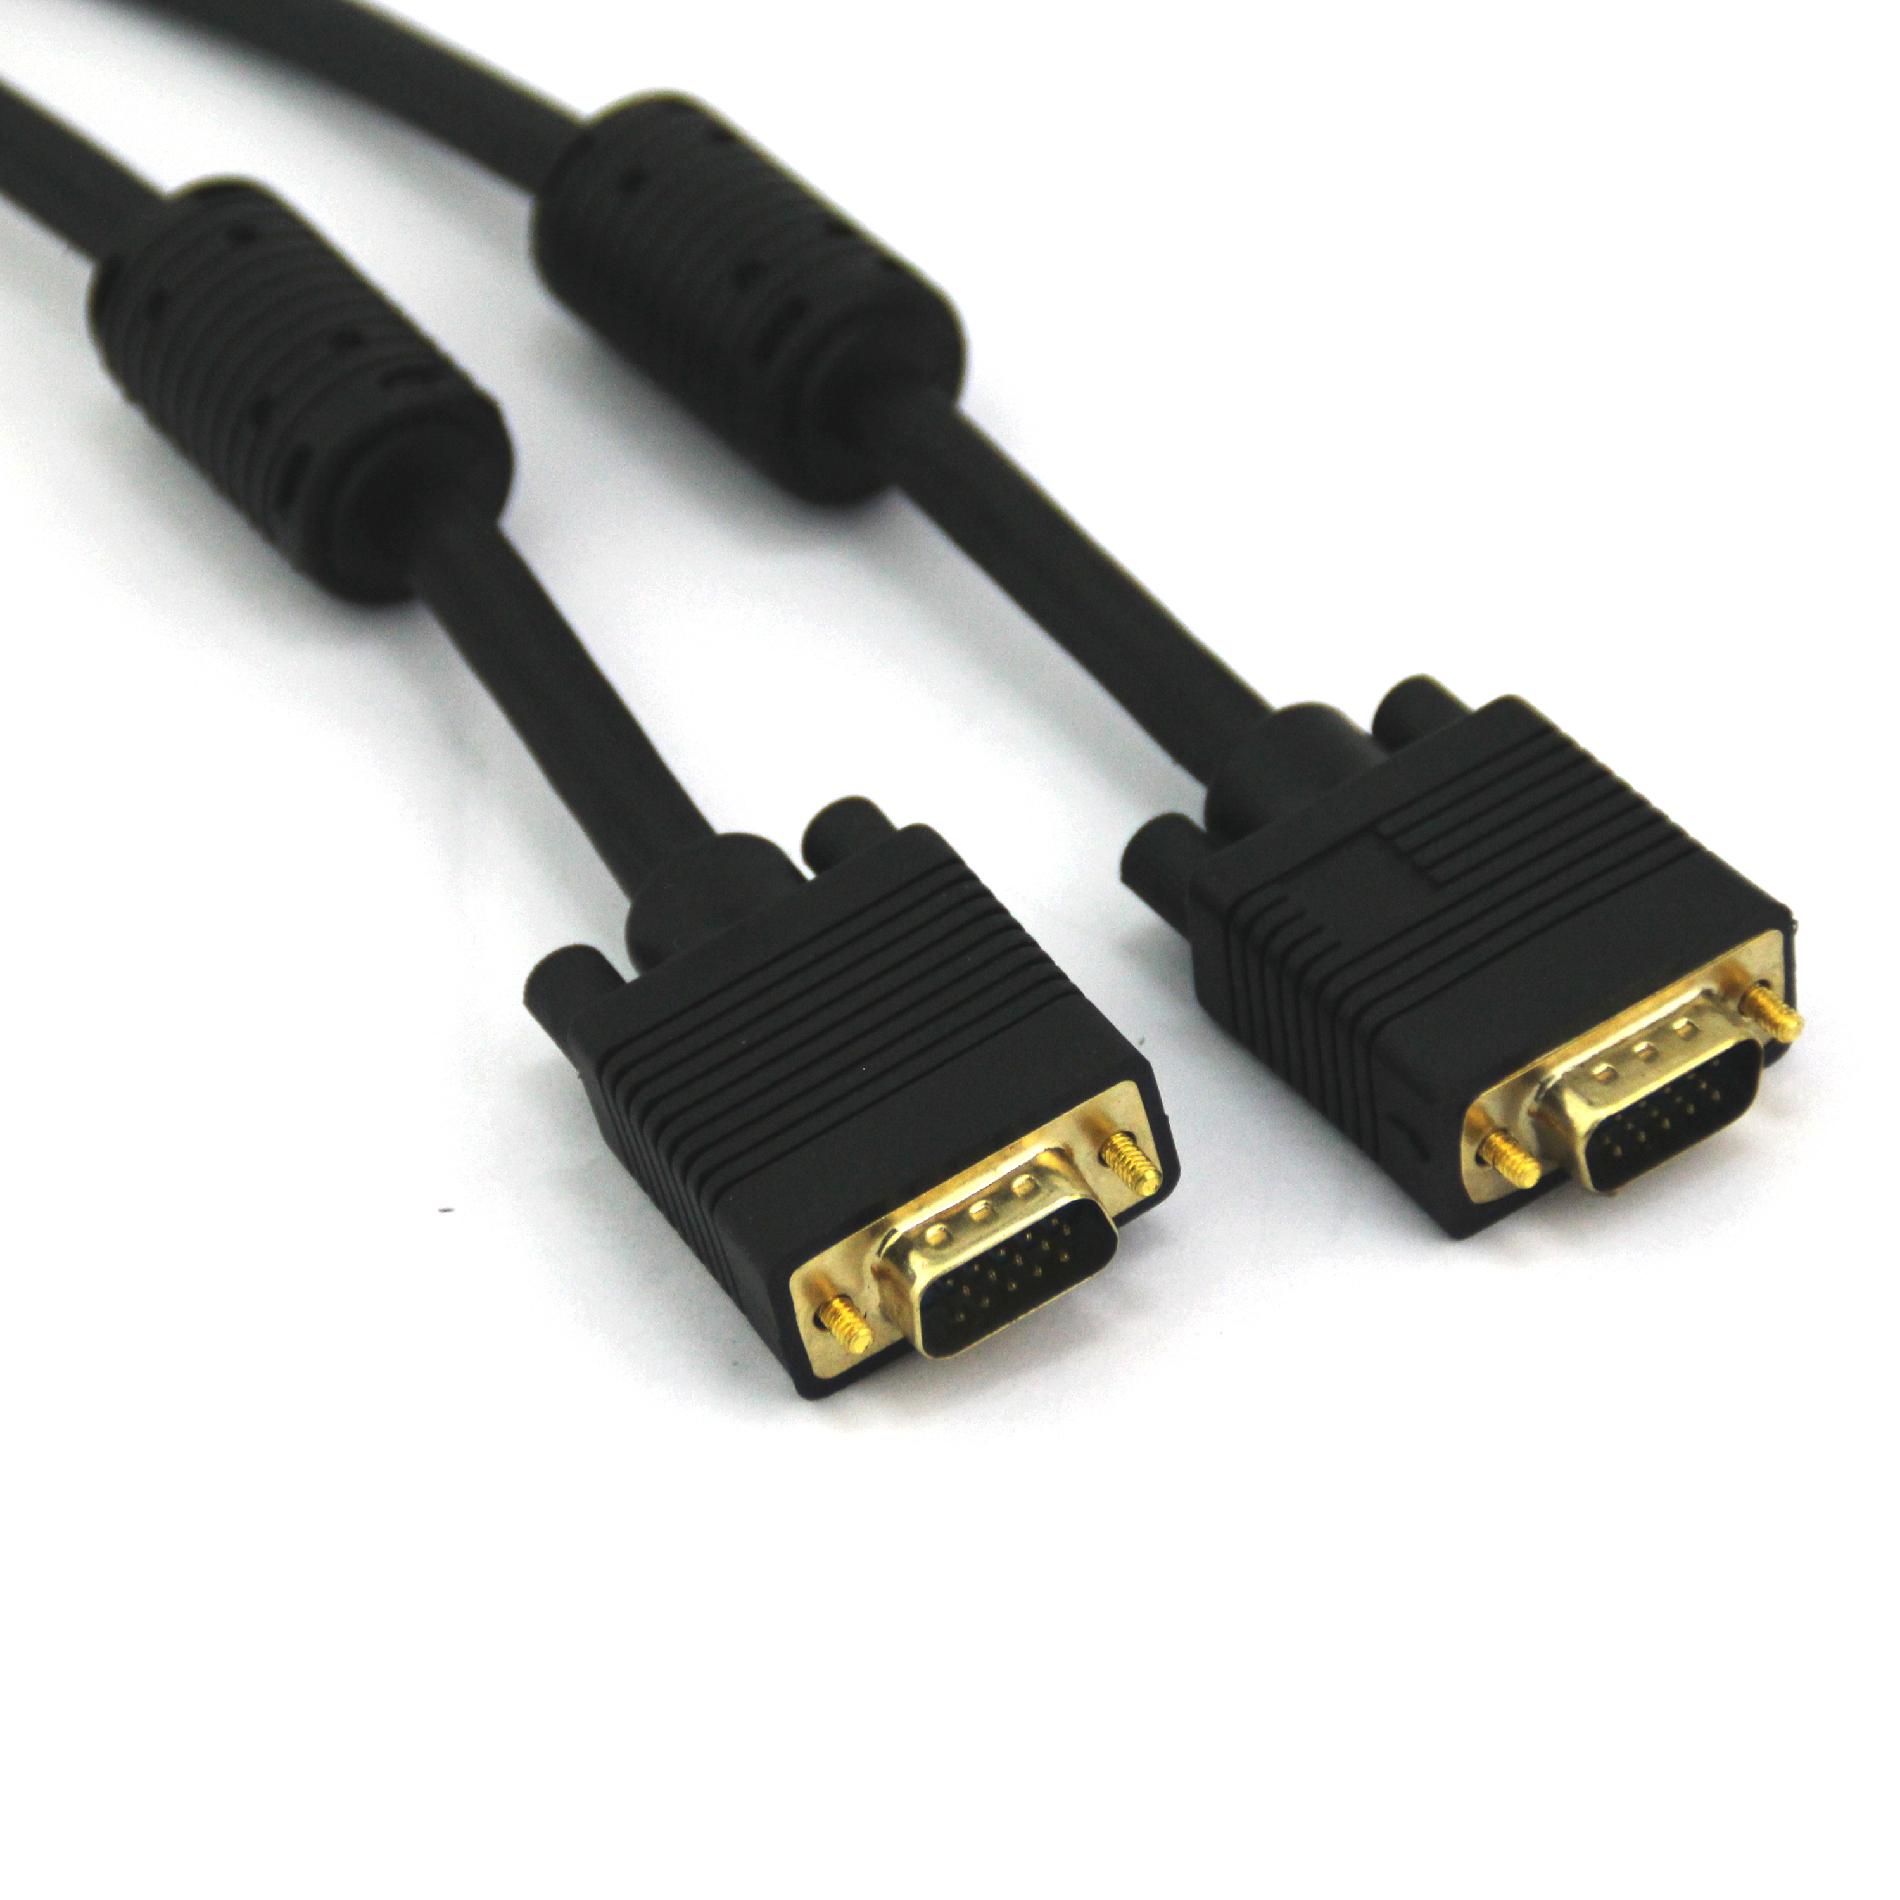 Vcom  VC-VGA50M SVGA HD15 Male to Male Black Cable, Gold Plated, 50feet